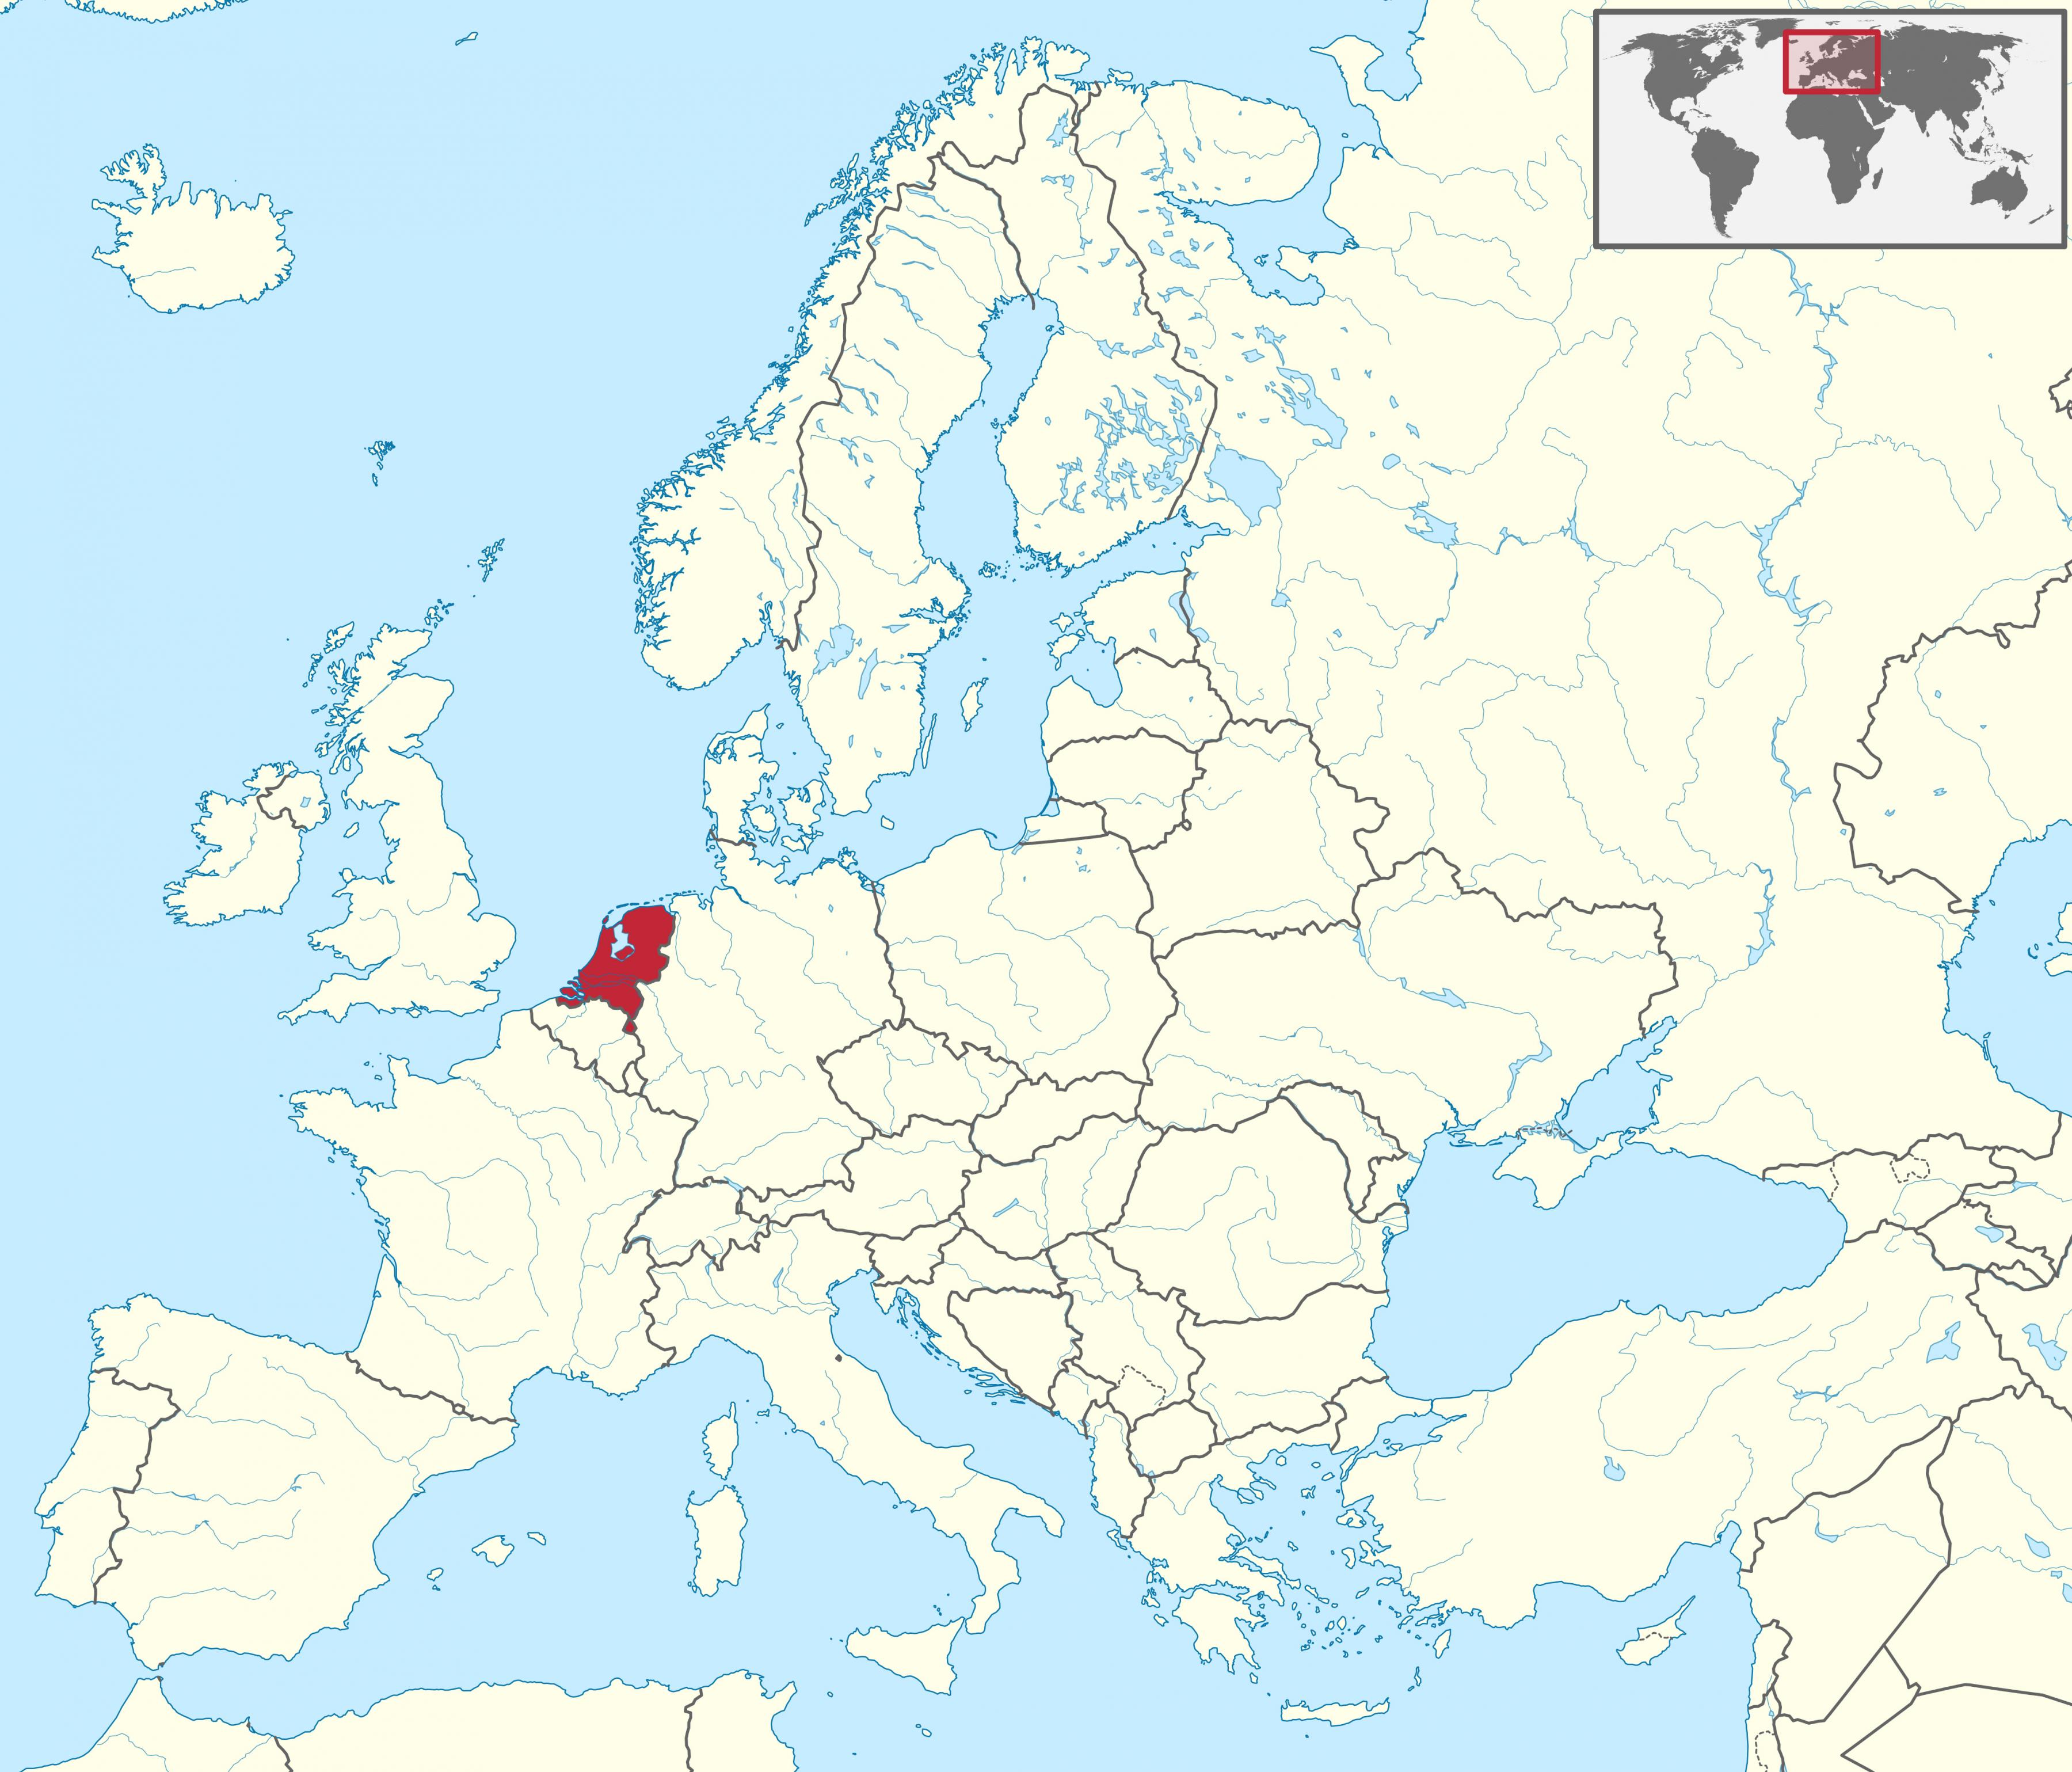 Locate Netherlands In World Map Netherlands On World Map: Surrounding Countries And Location On Europe Map